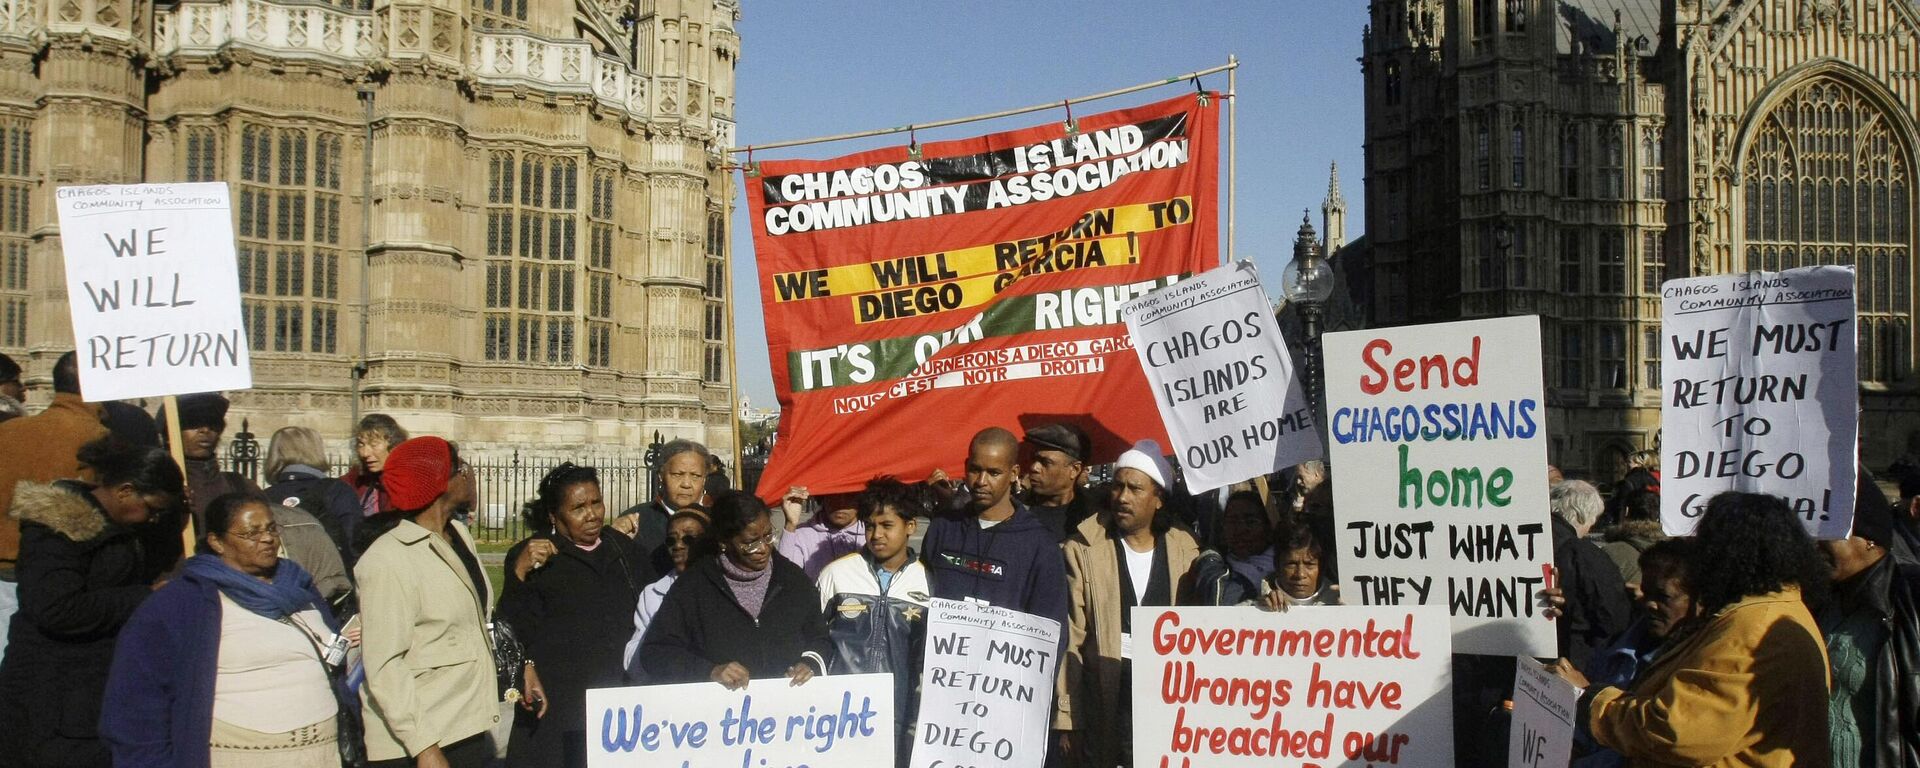 Demonstrators take part in a protest outside the Houses of Parliament in London, after a court ruling decided Chagos Islanders are not allowed to return to their homeland, Wednesday Oct. 22, 2008.  - Sputnik International, 1920, 15.02.2023